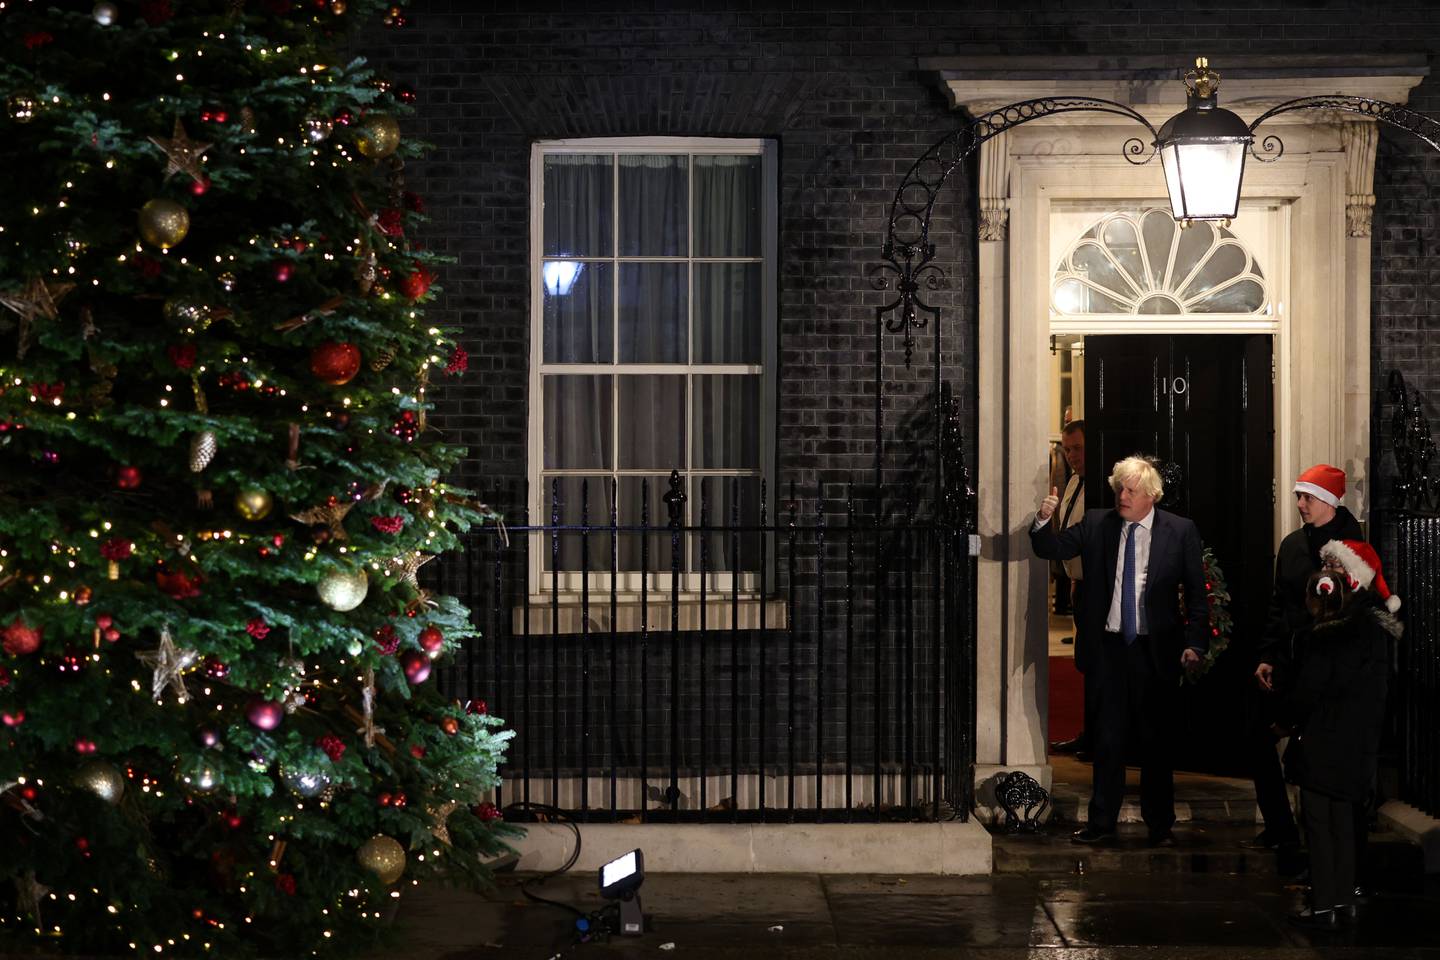 British Prime Minister Boris Johnson lights the Christmas tree in Downing Street in December 2021. Getty Images